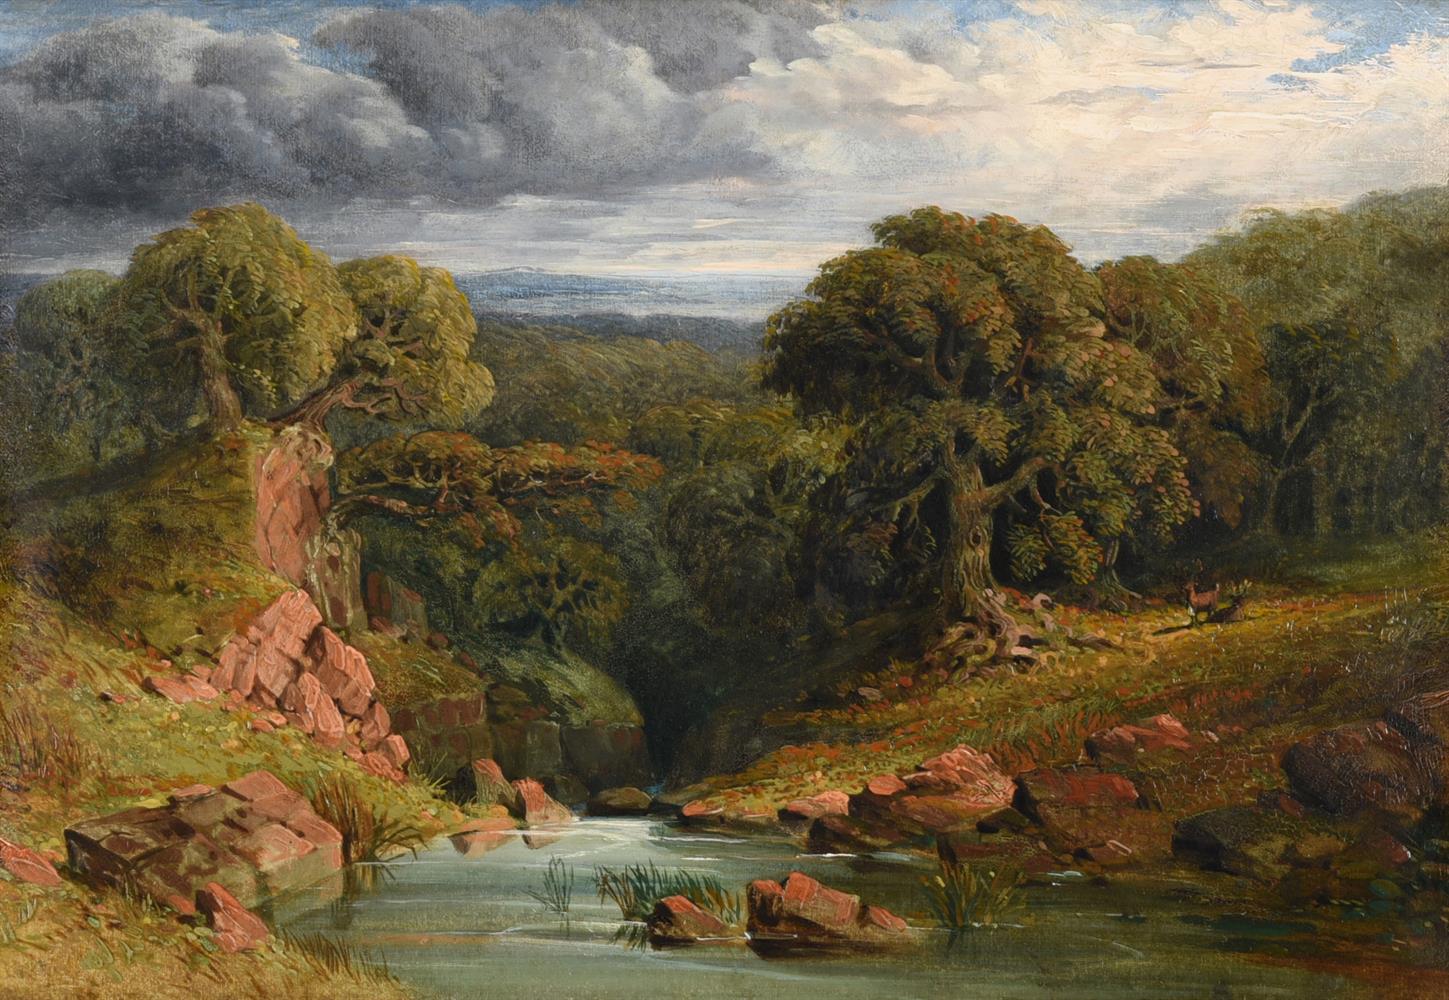 JOHN LINNELL (BRITISH 1792-1882), ENGLISH LANDSCAPE WITH DEER BY A RIVER